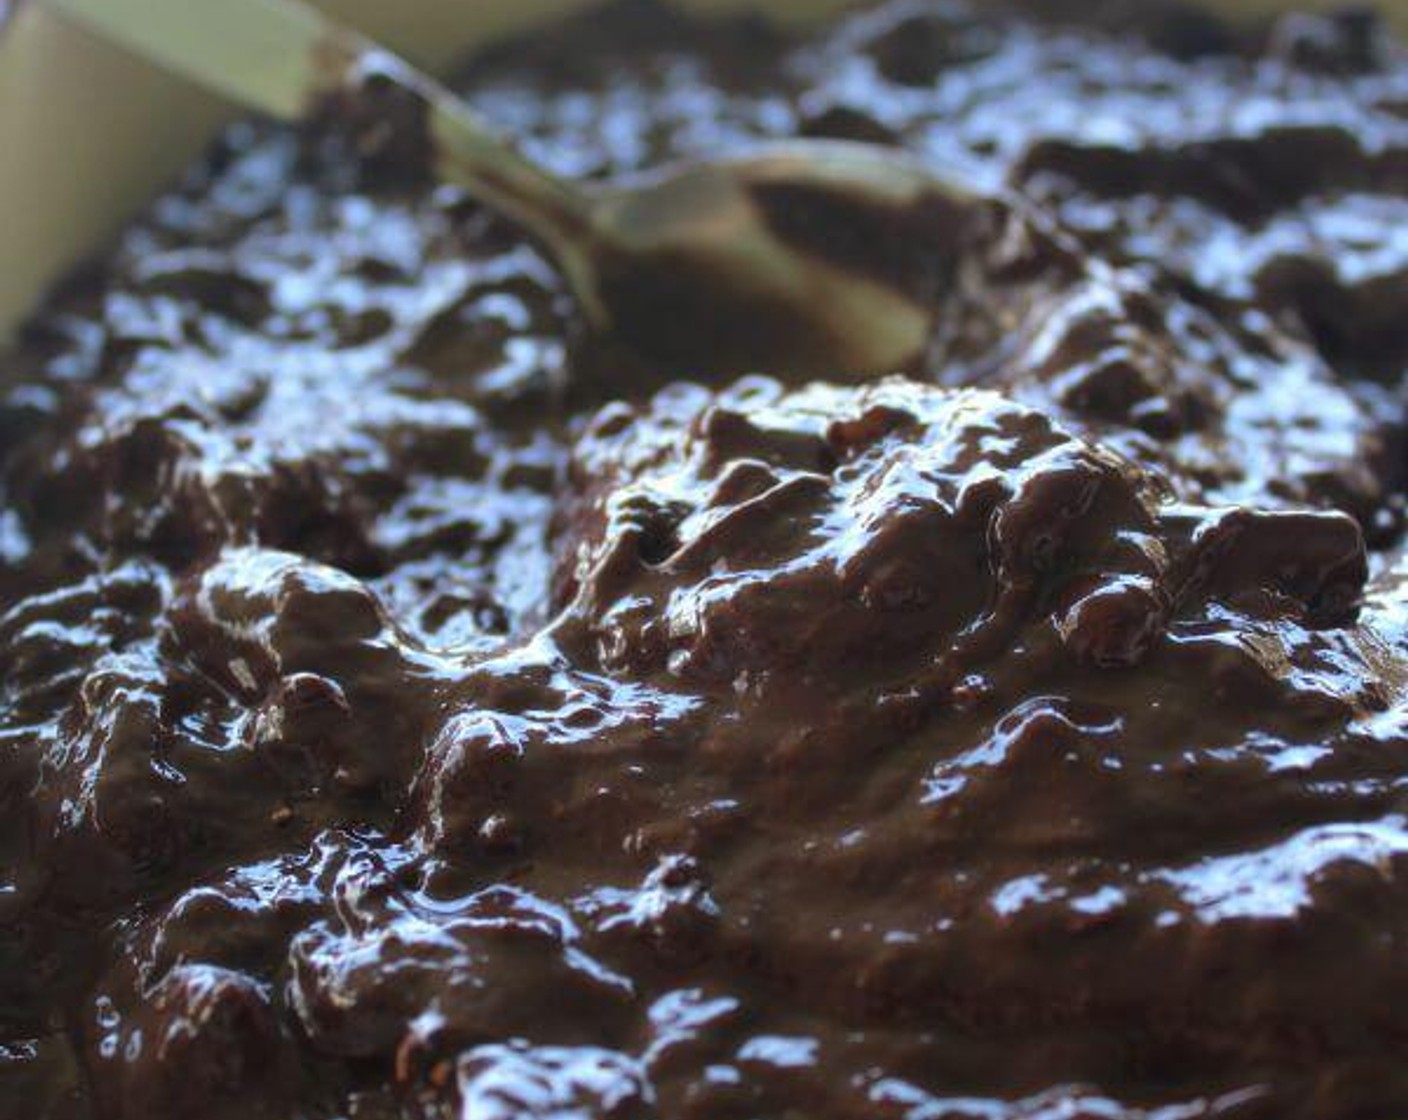 step 3 Add the Dark Chocolate Chips (1/3 cup), Unsweetened Cocoa Powder (1 cup), Dates (3/4 cup), and Baking Soda (1/2 tsp) and fold until just combined. Pour the mixture into the baking tin and level it out with a metal spoon.